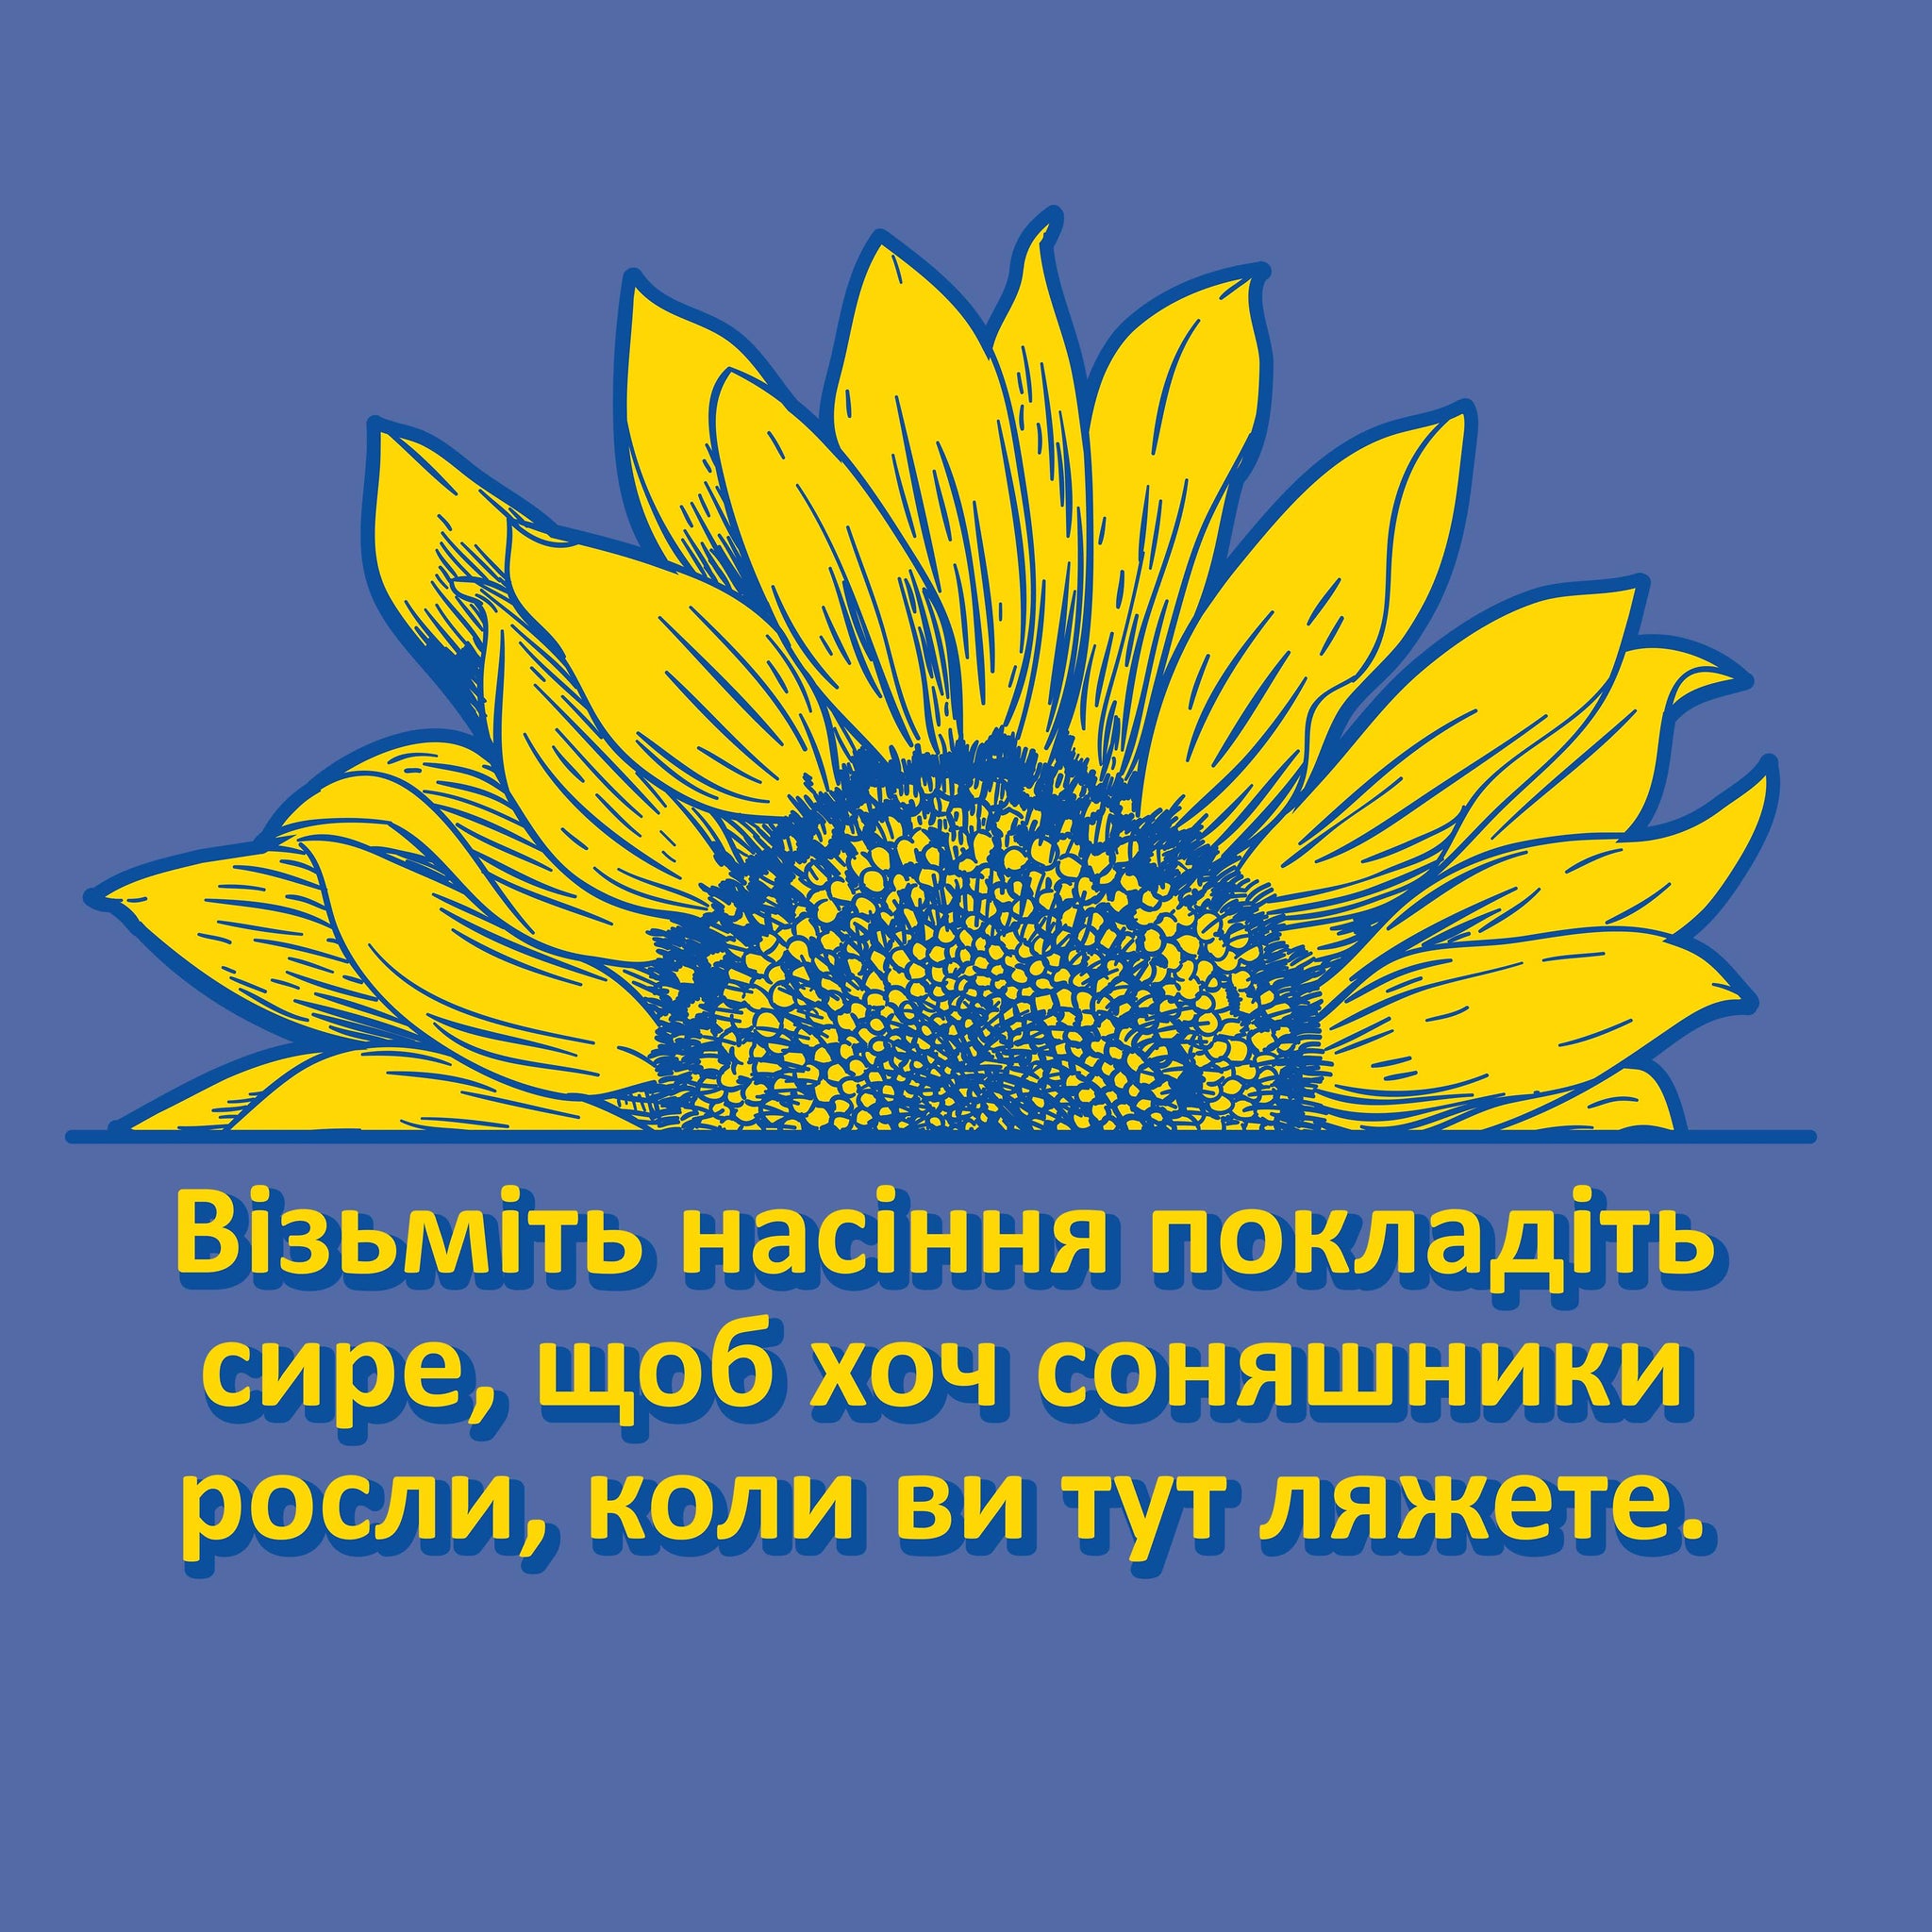 design by the chesterfield suite of a sunflower with the phrase Take these seeds and put them in your pocket so sunflowers will grow when you die in ukrainian.